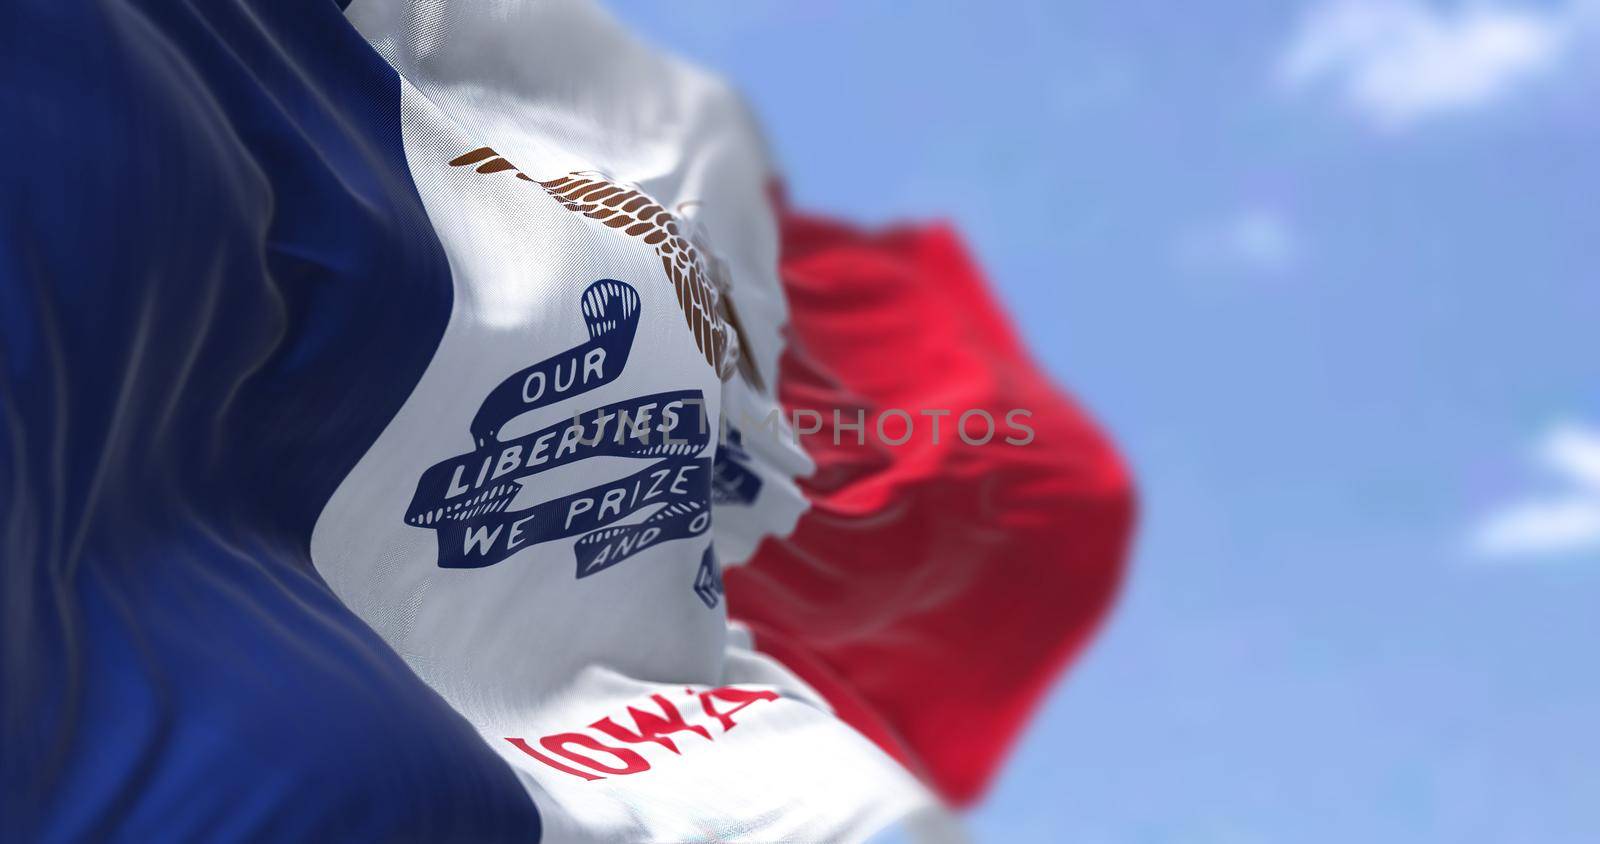 The US state flag of Iowa waving in the wind. Iowa is a state located in the midwestern region of the United States. Democracy and independence.